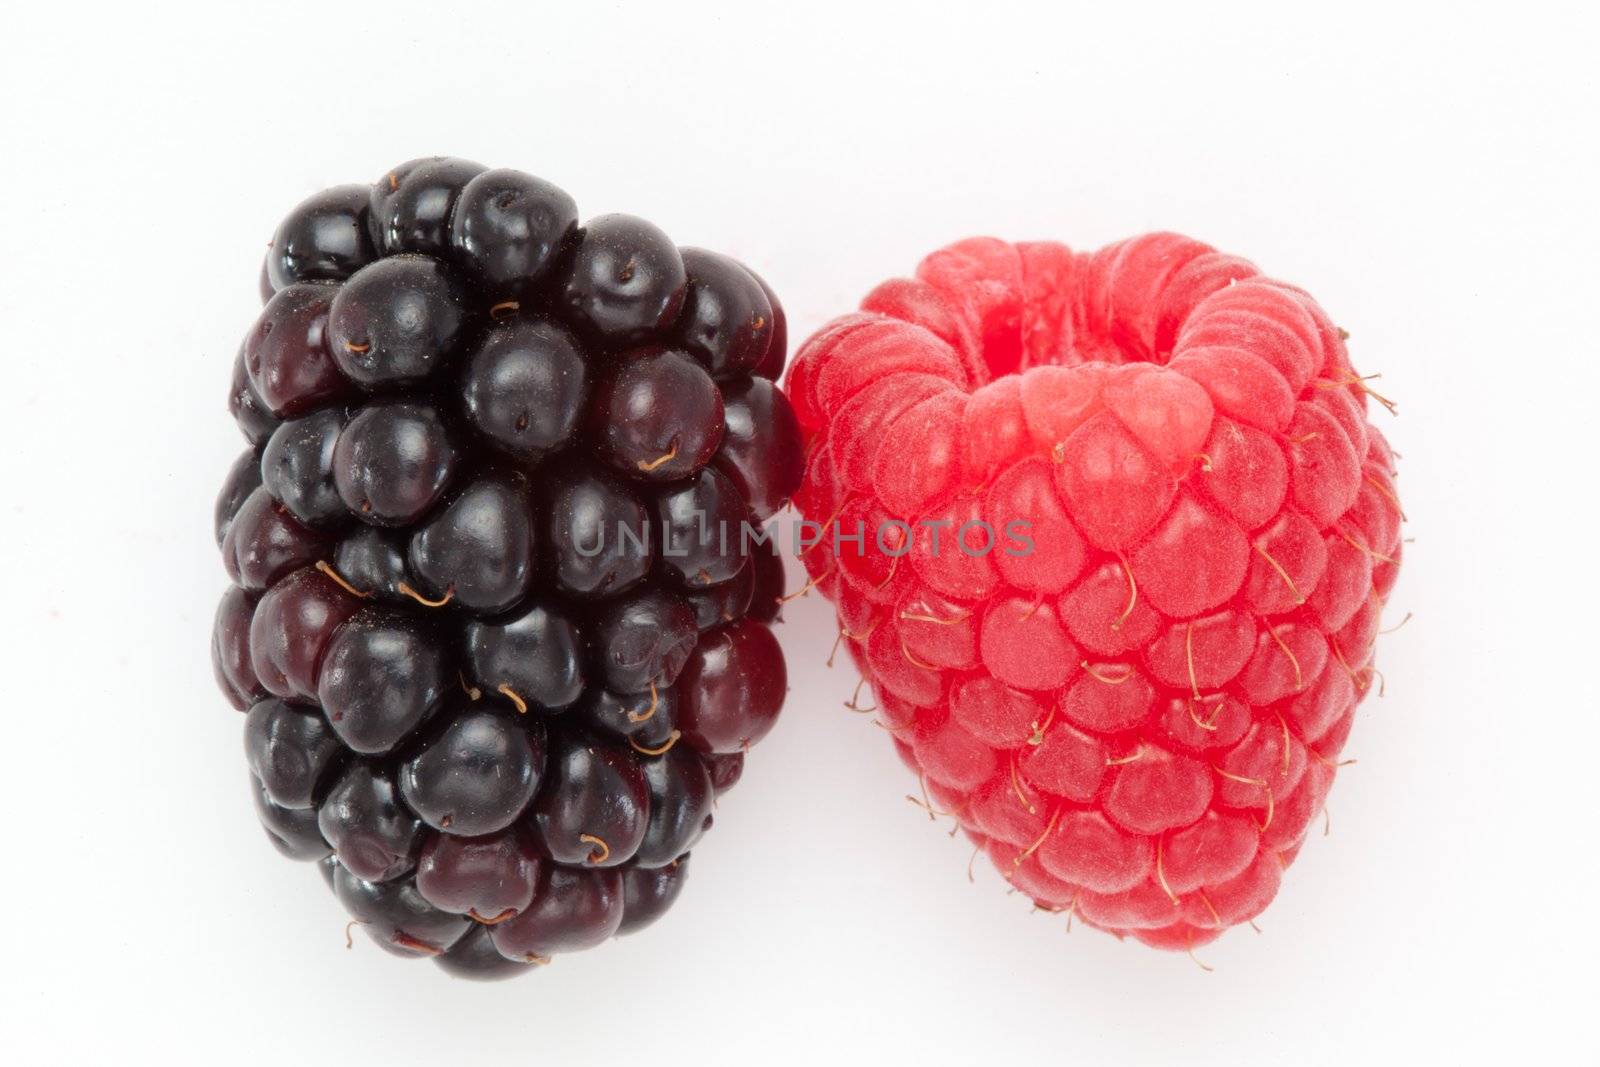 Blackberry and Raspberry against a white blackground